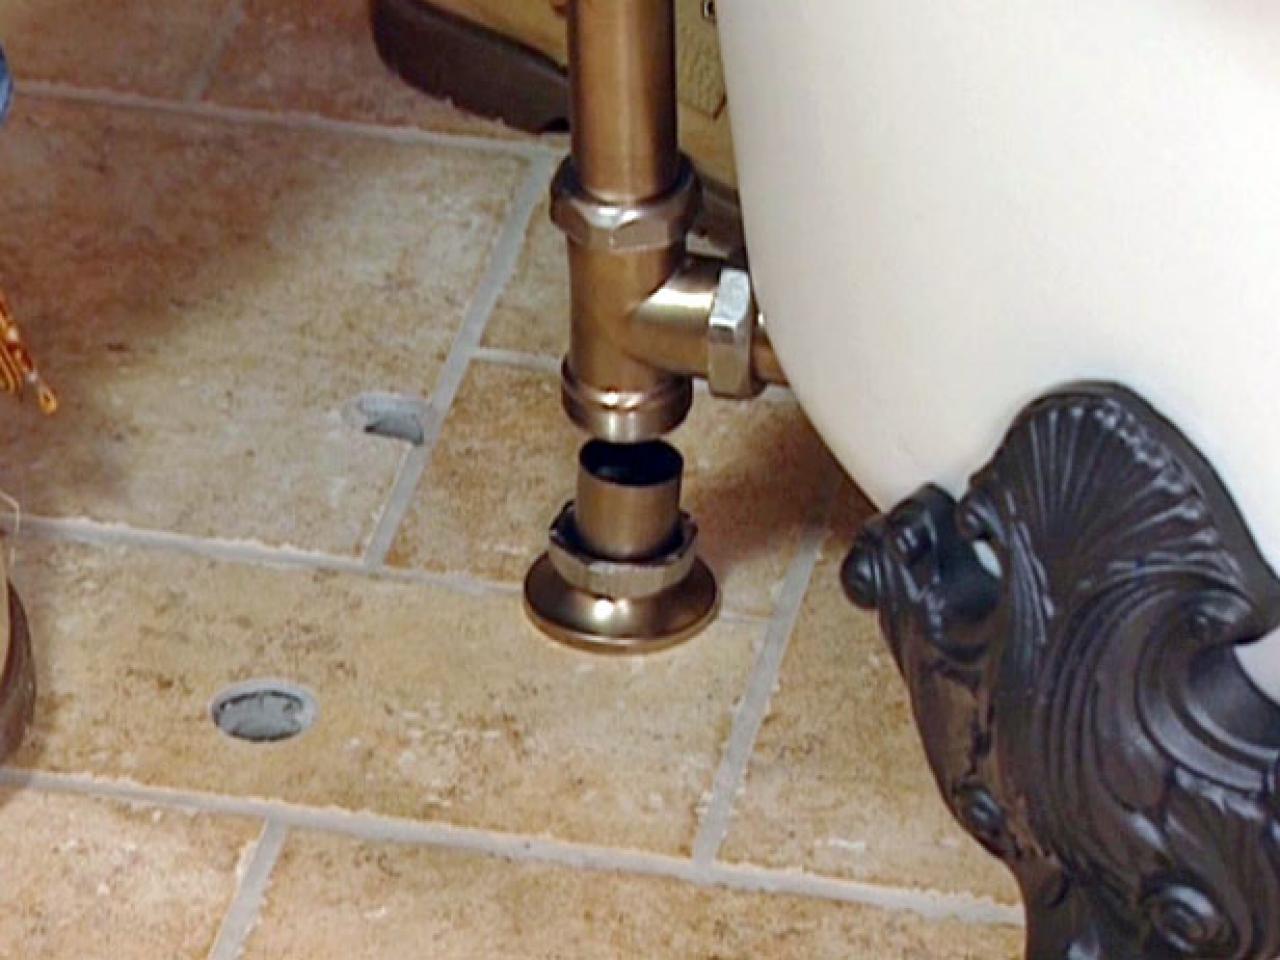 Install Plumbing For A Claw Foot Tub, How To Install A Bathtub Drain